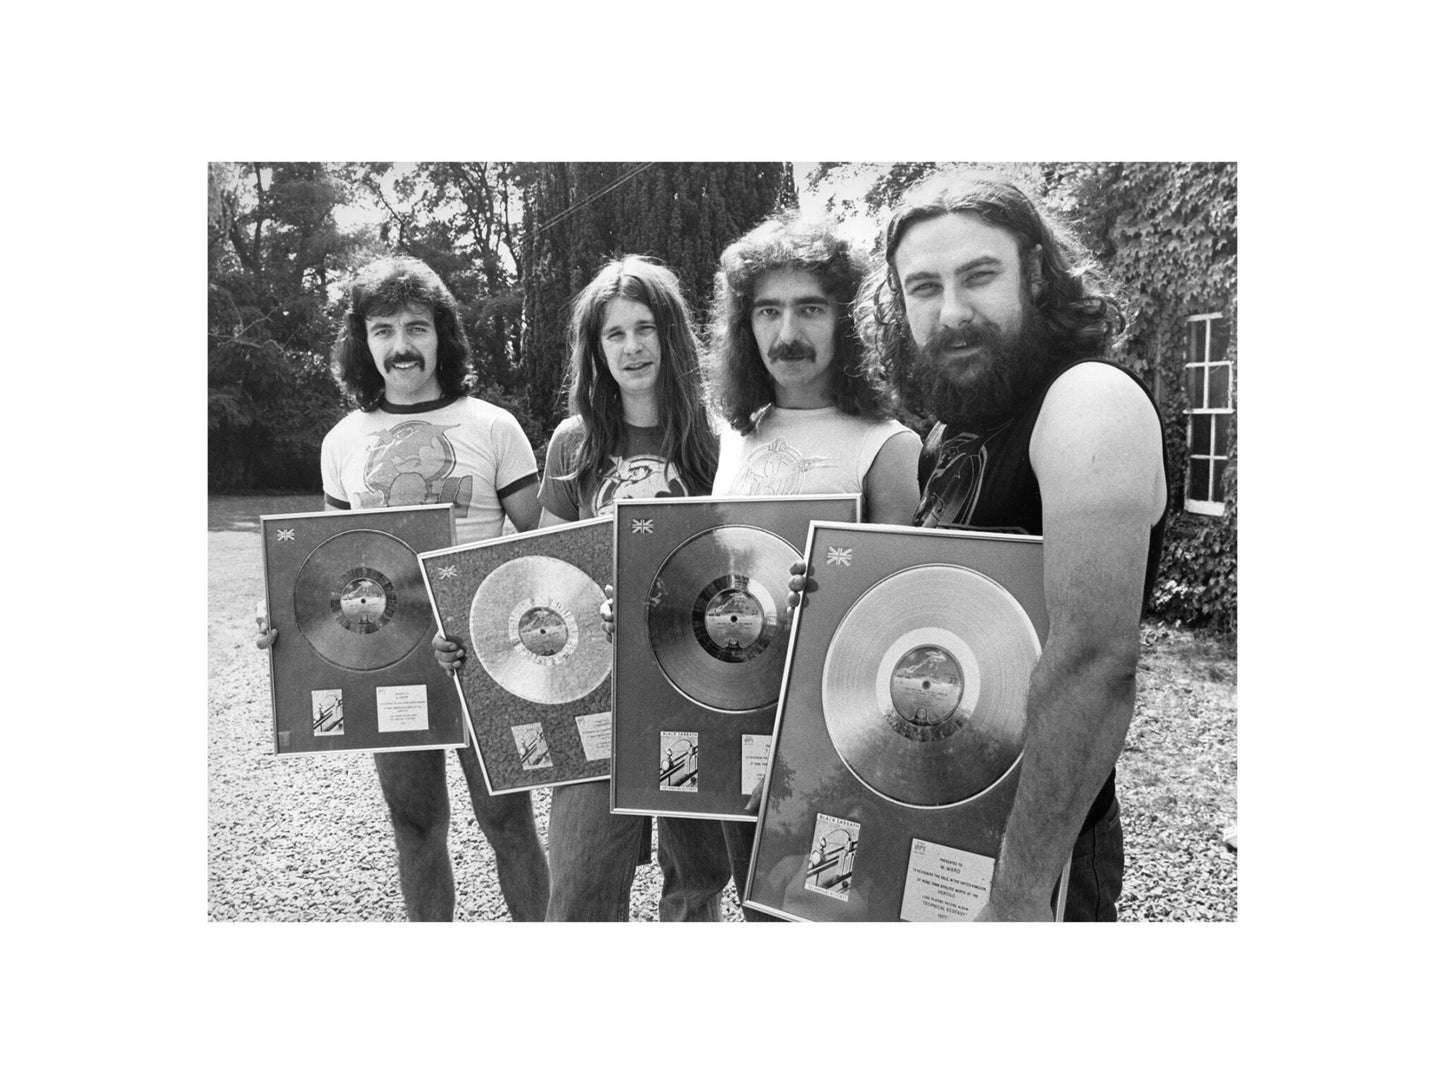 Black Sabbath - With Silver Discs For Technical Ecstasy, Wales, UK, 1977 Print 4